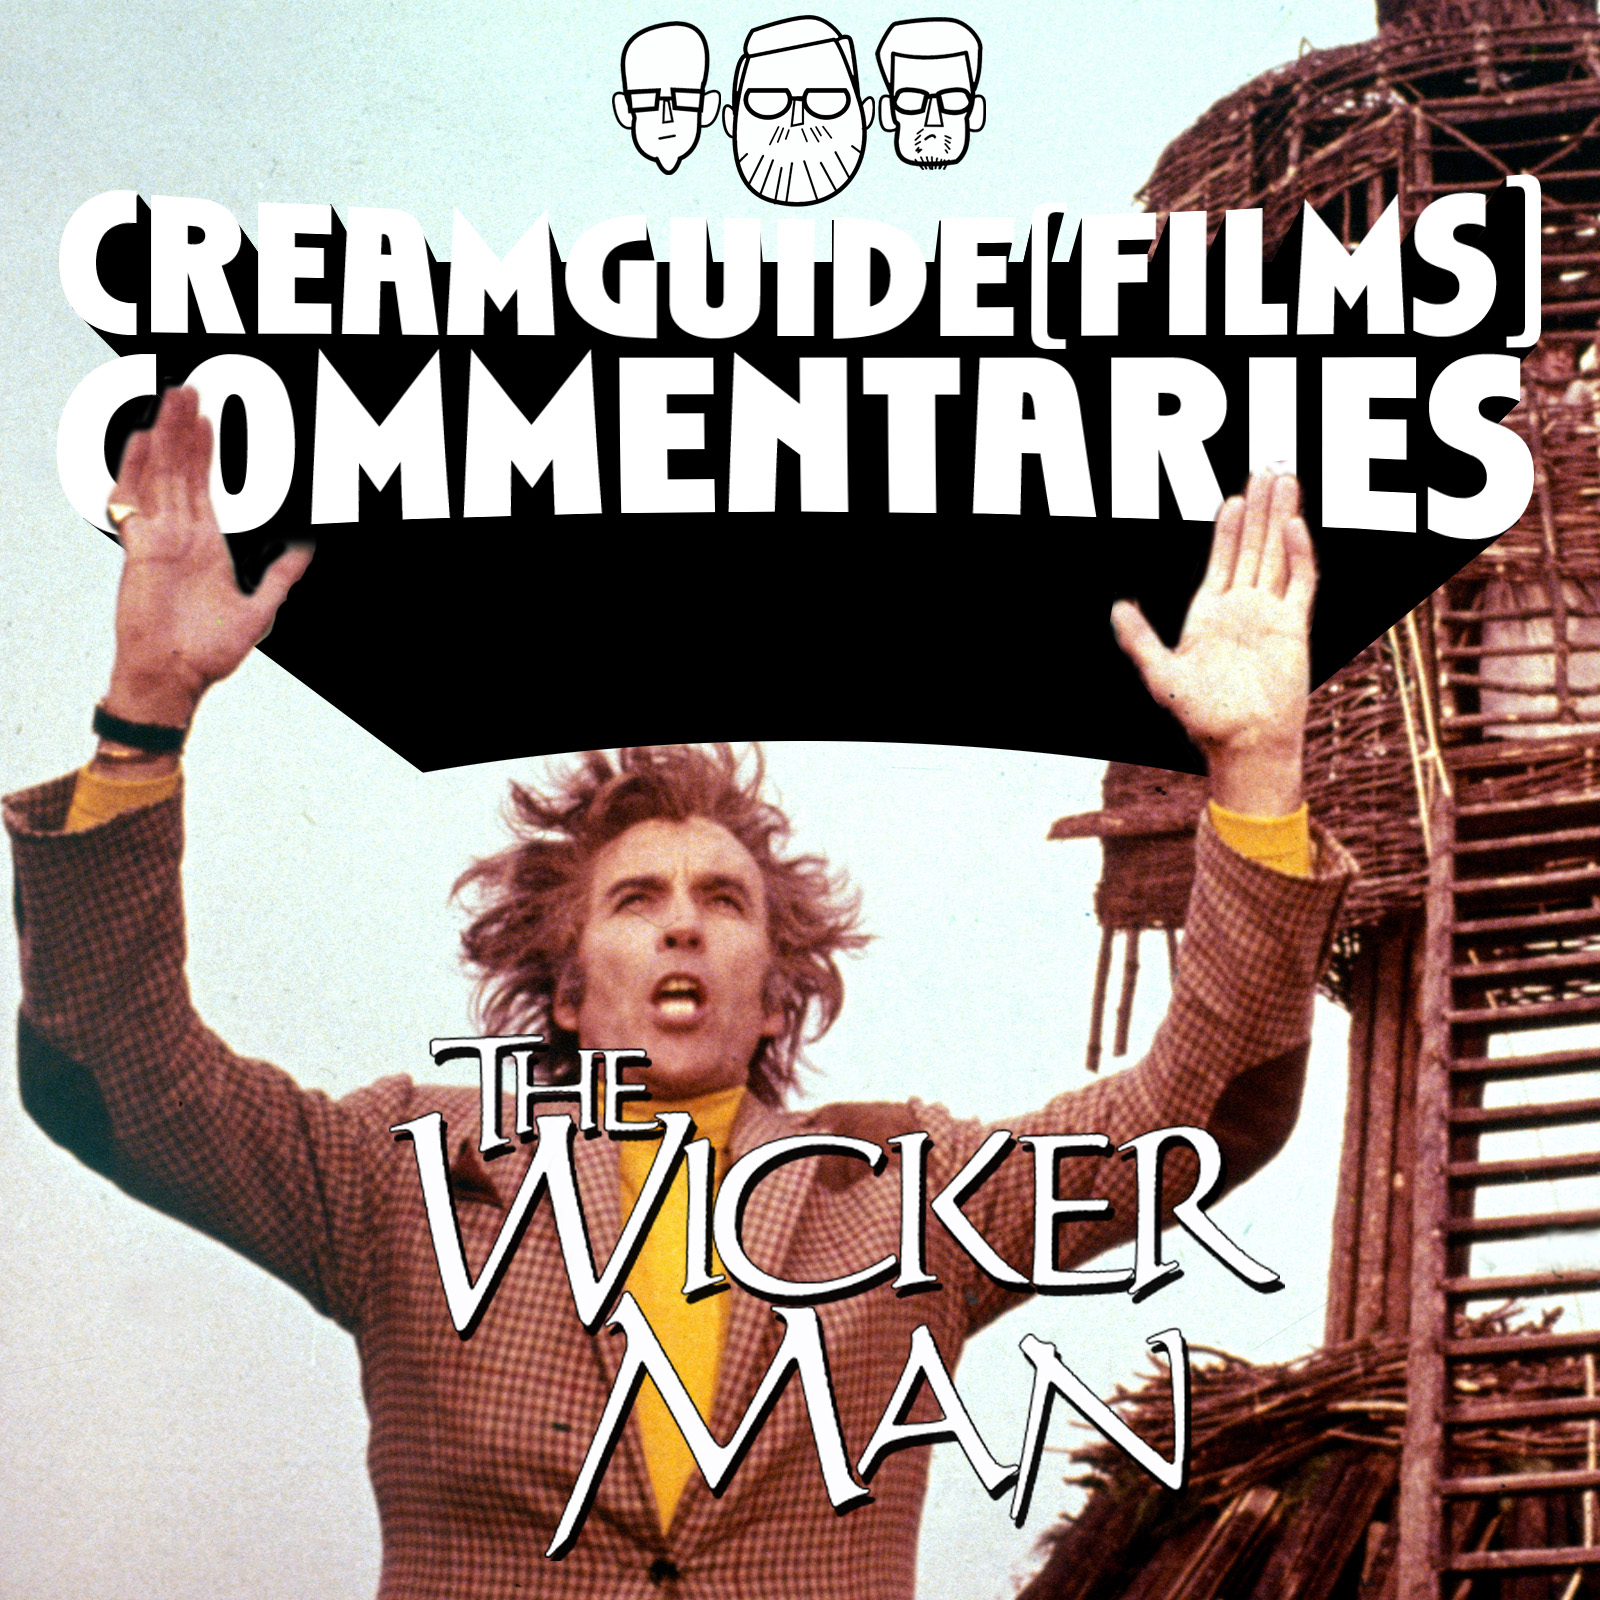 Creamguide(Films) Commentaries: The Wicker Man